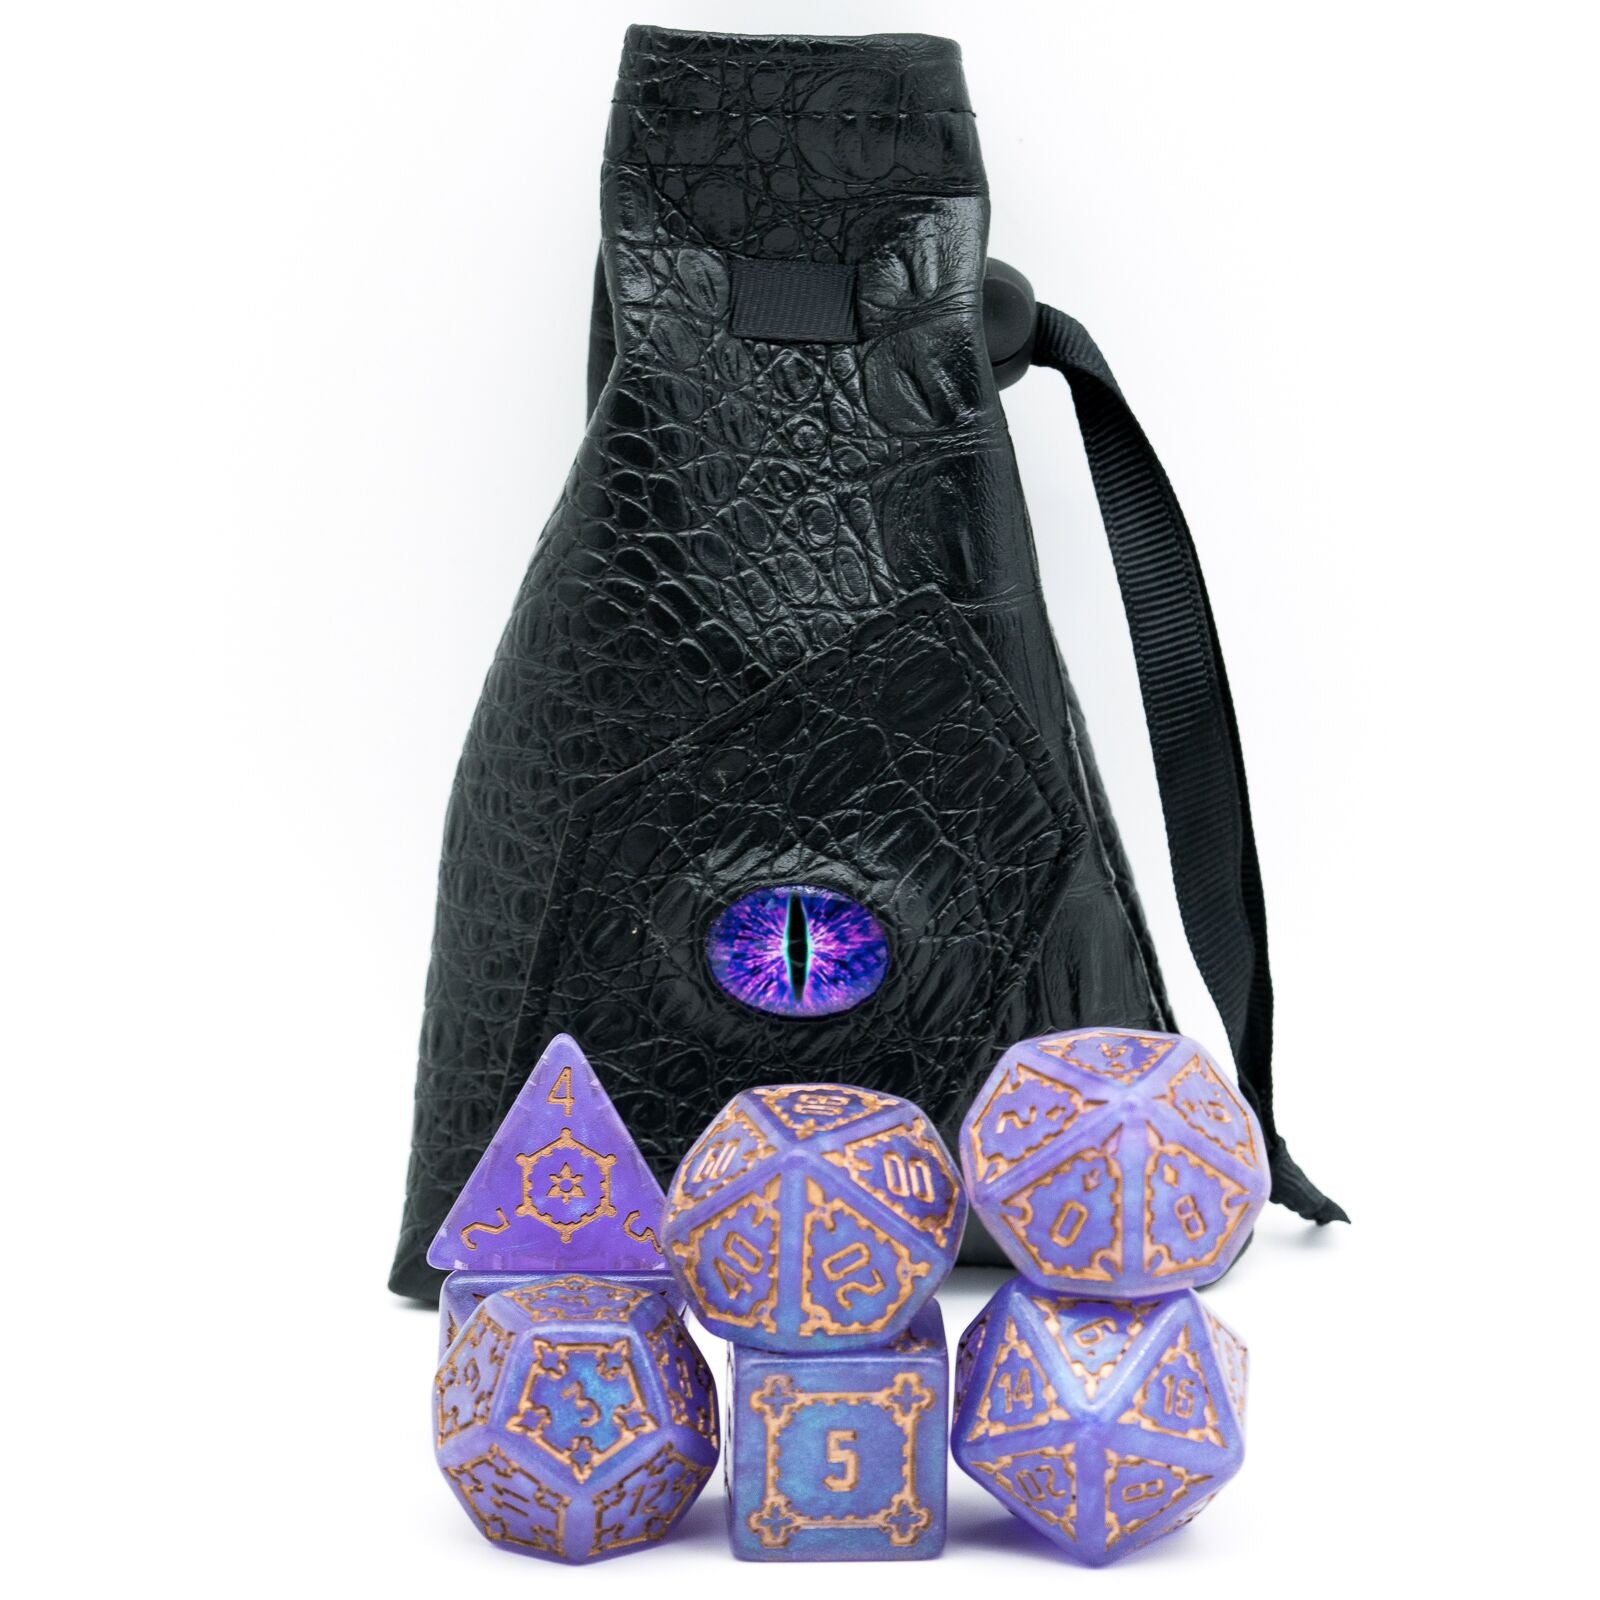 Violet dice stacked in front of dragon eye dice bag